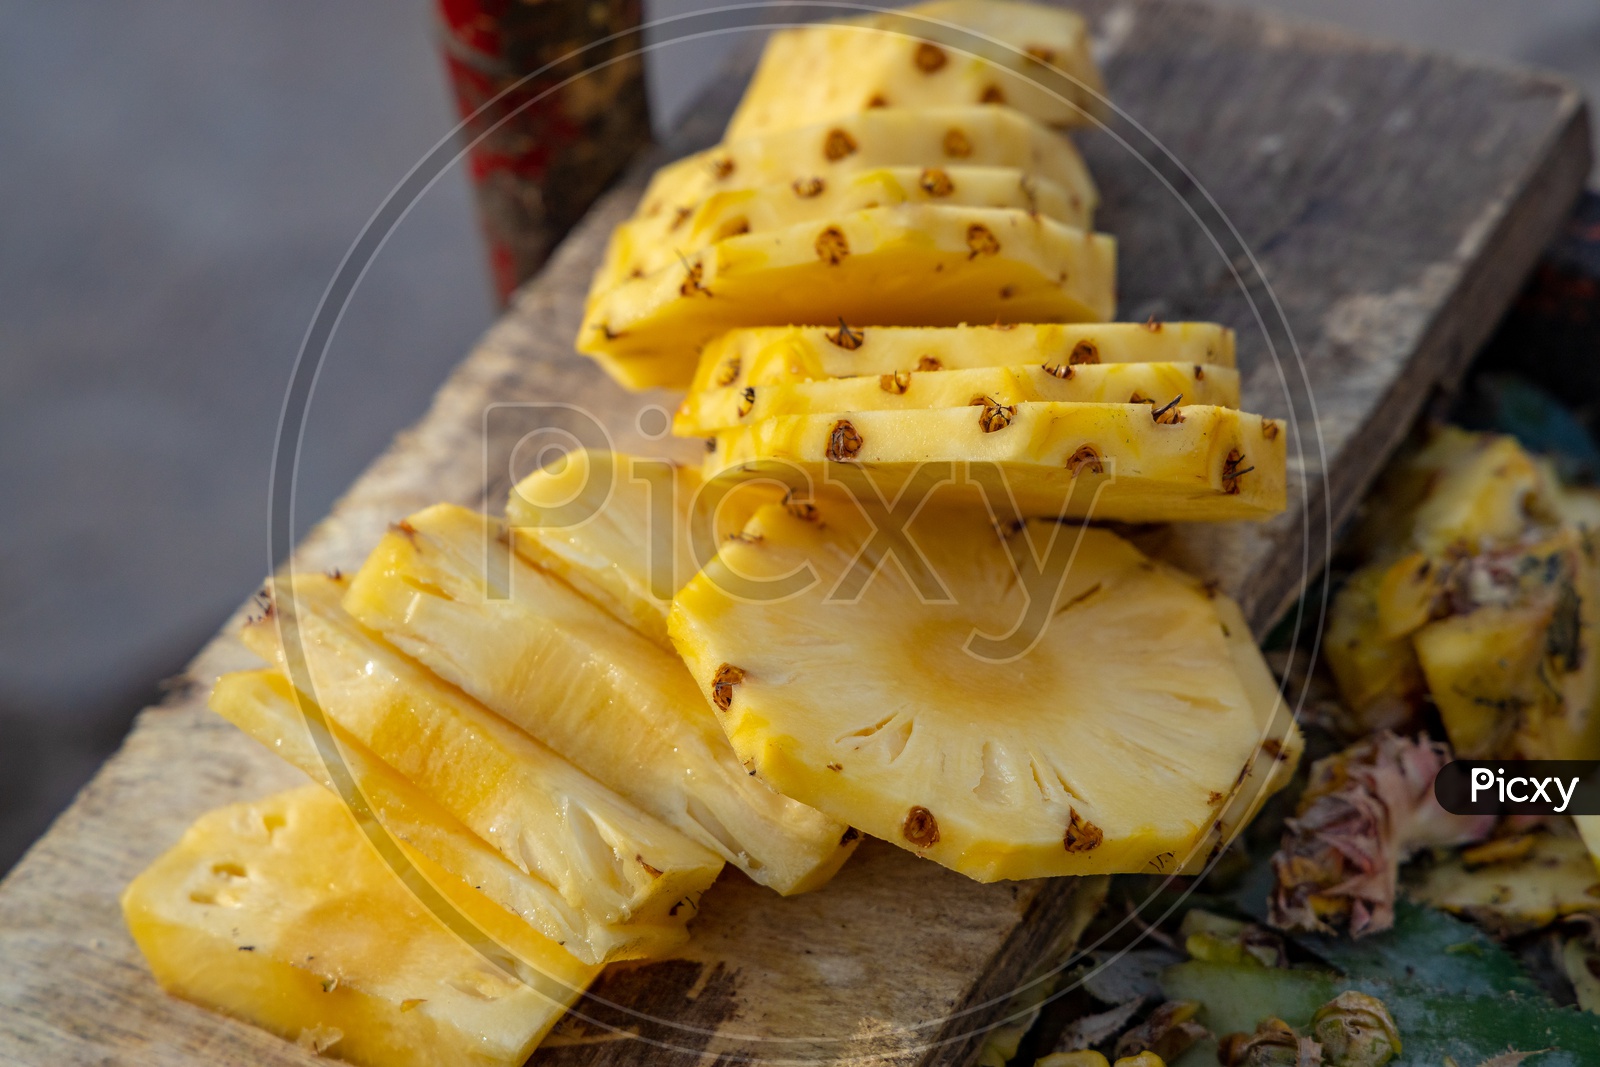 Pineapple Cut Into Pieces